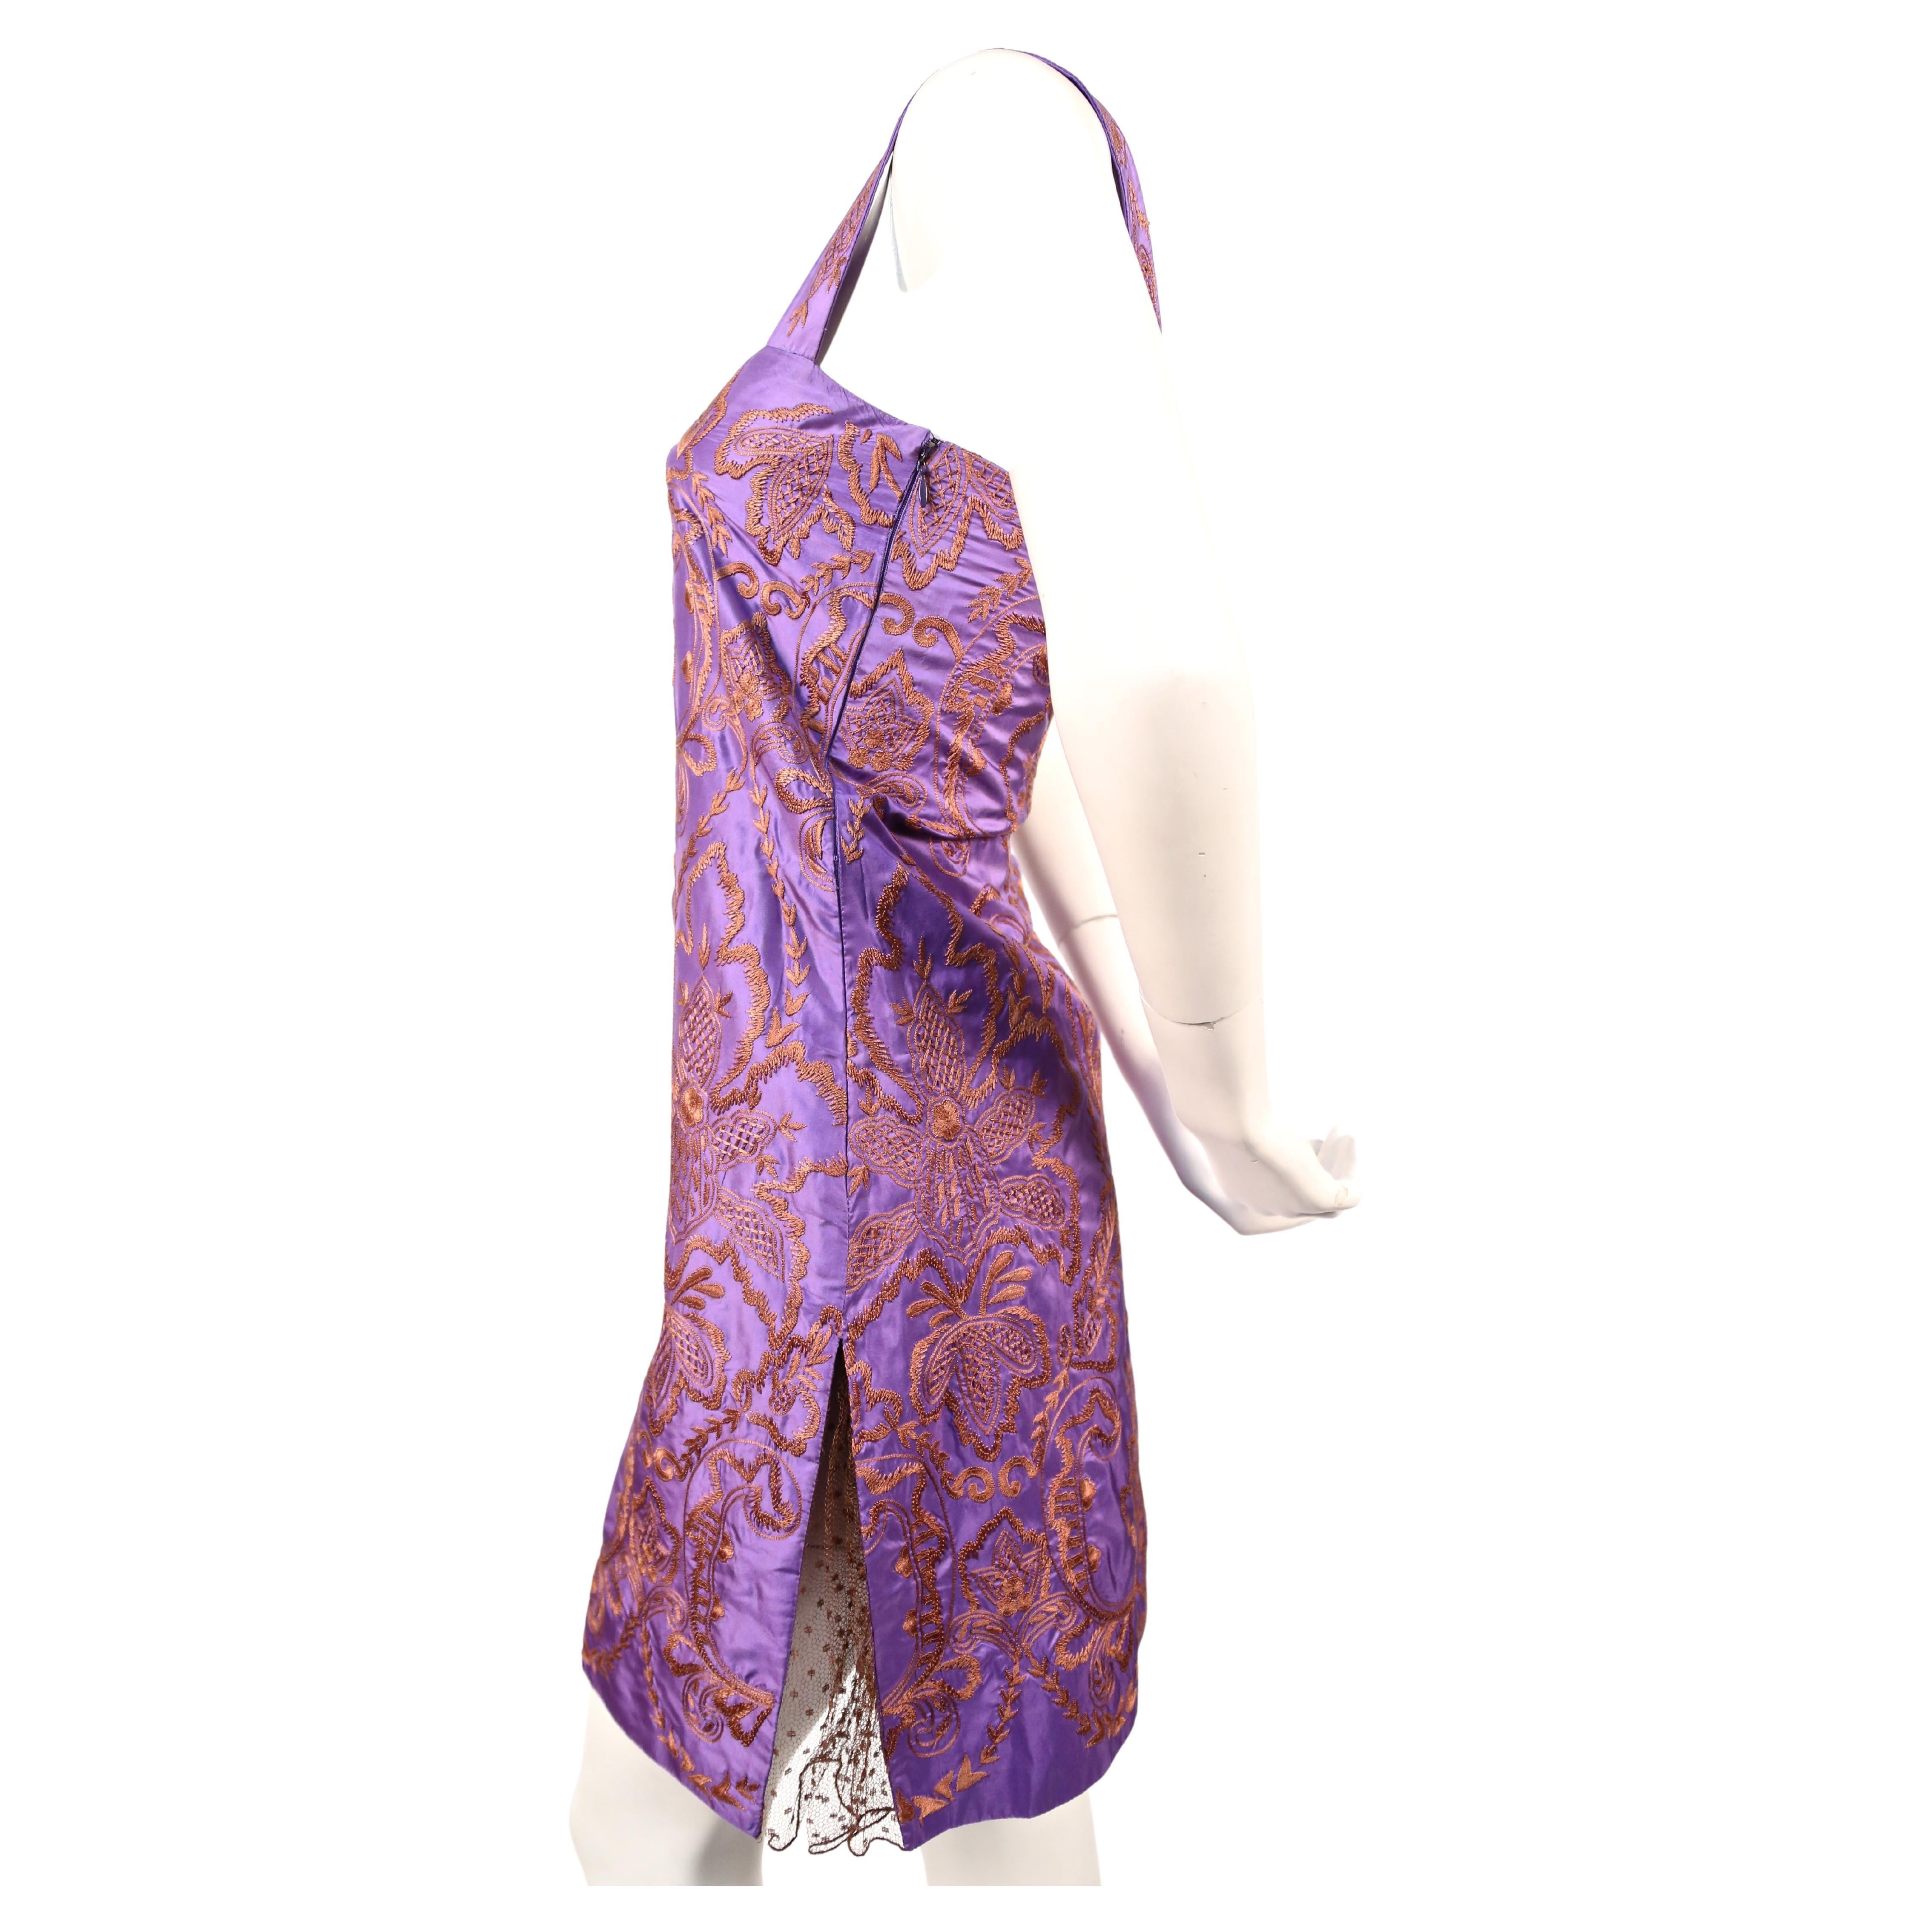 Rich purple silk dress with golden orange hand embroidery and brown tulle designed by Valentino dating to the early 1990's. Fits a size 0 or 2. Approximate measurements: bust 31